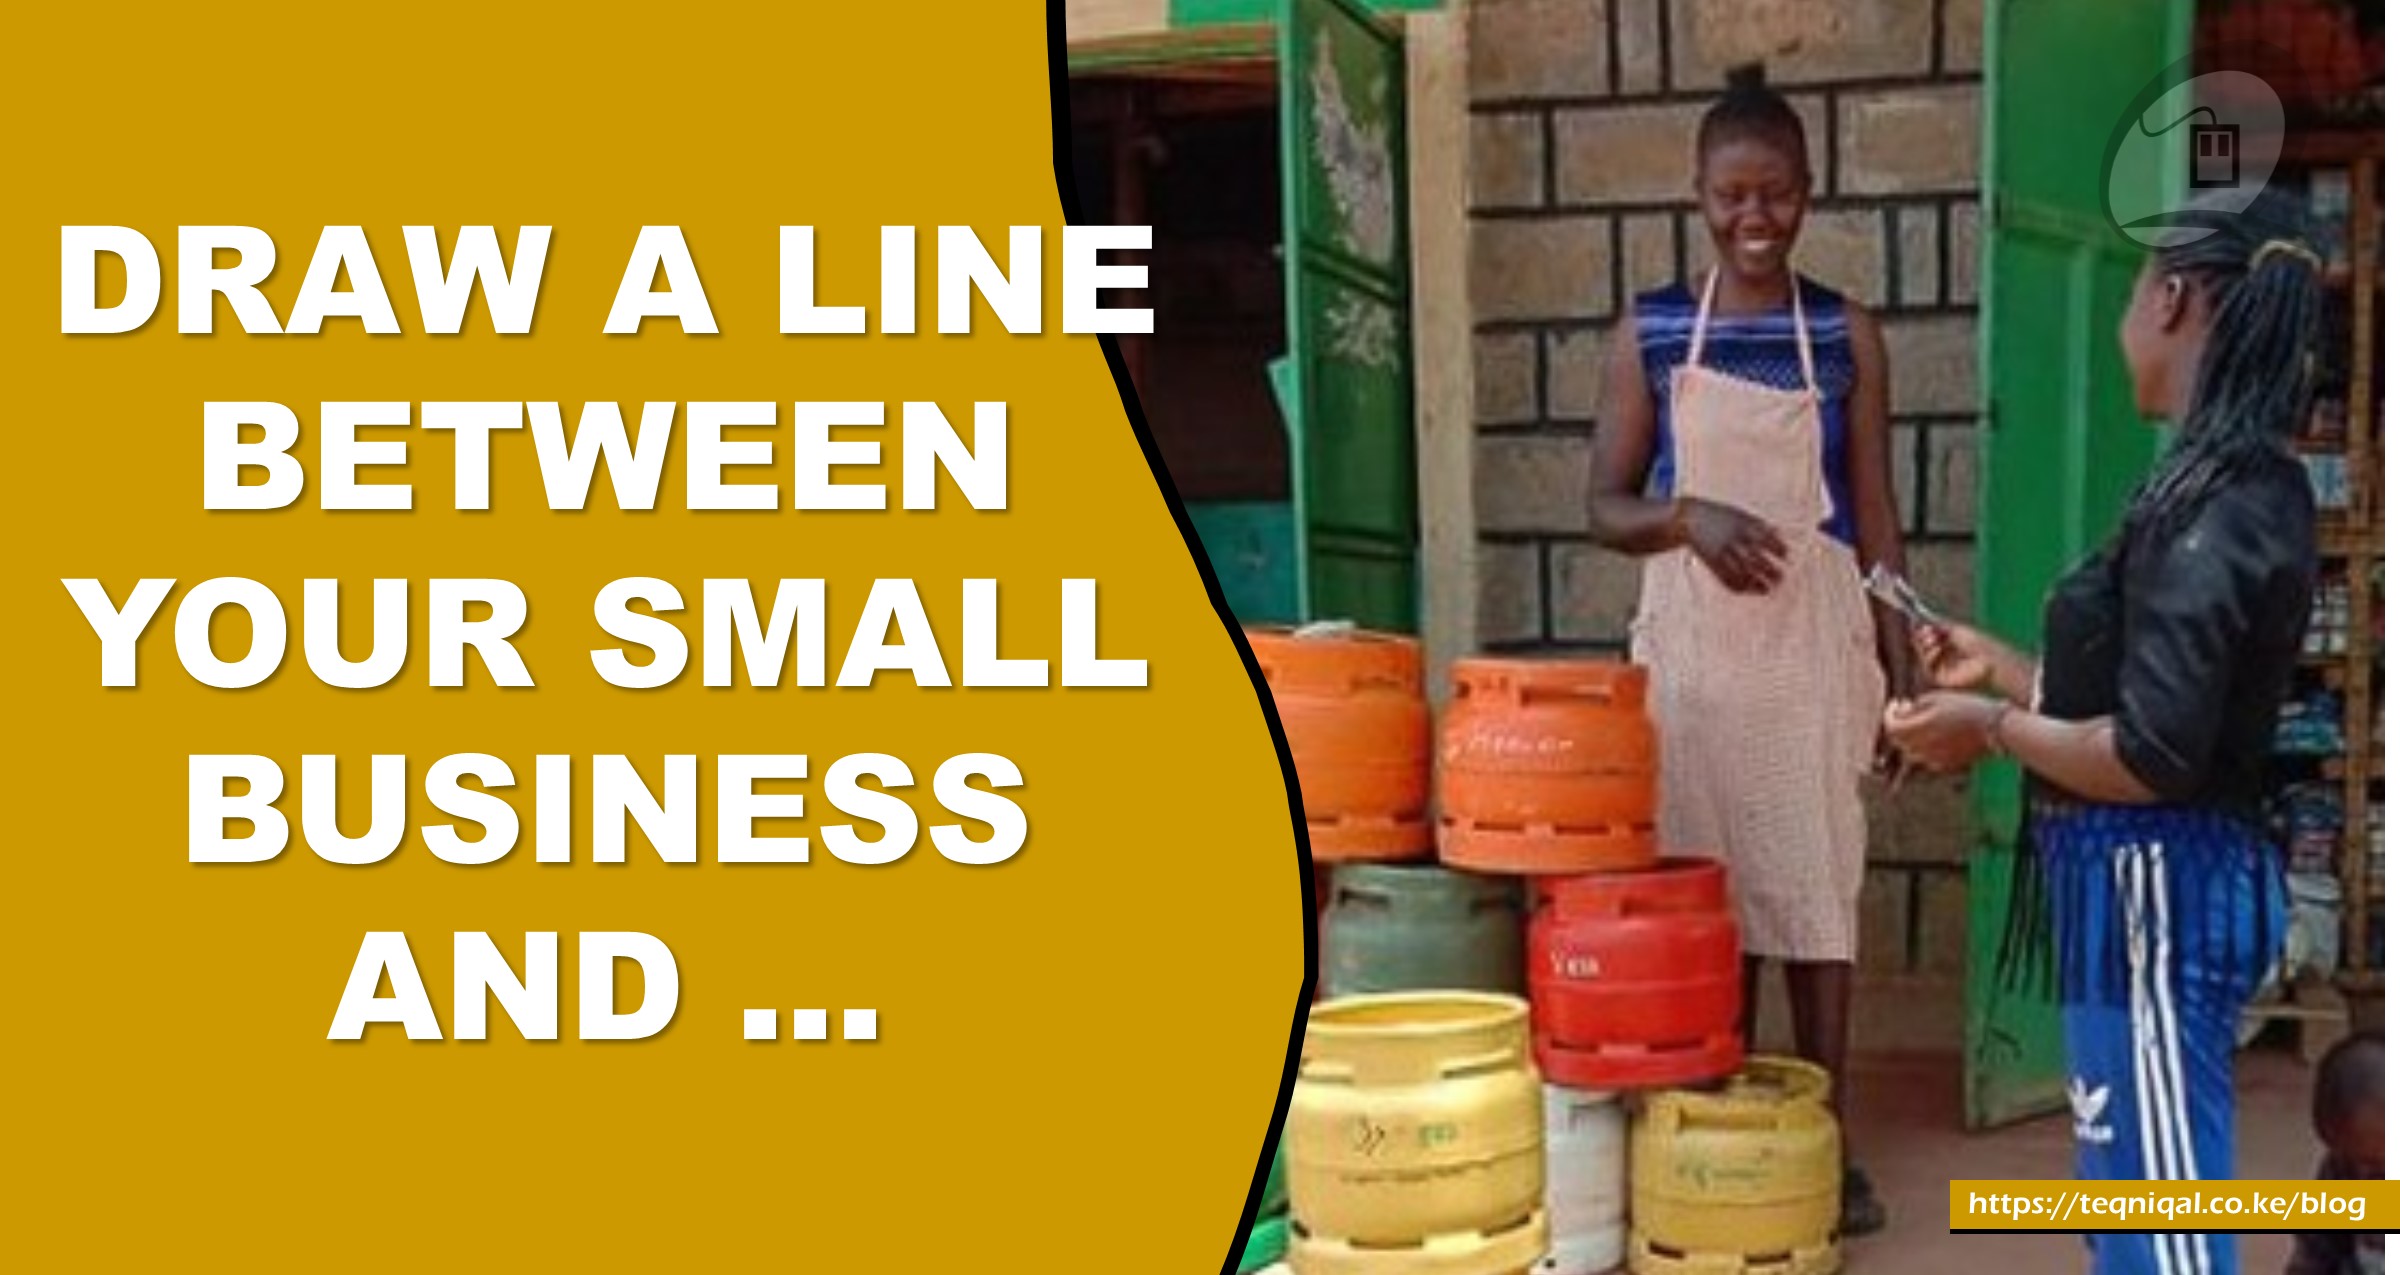 Draw A Line Between Your Small Business And ...